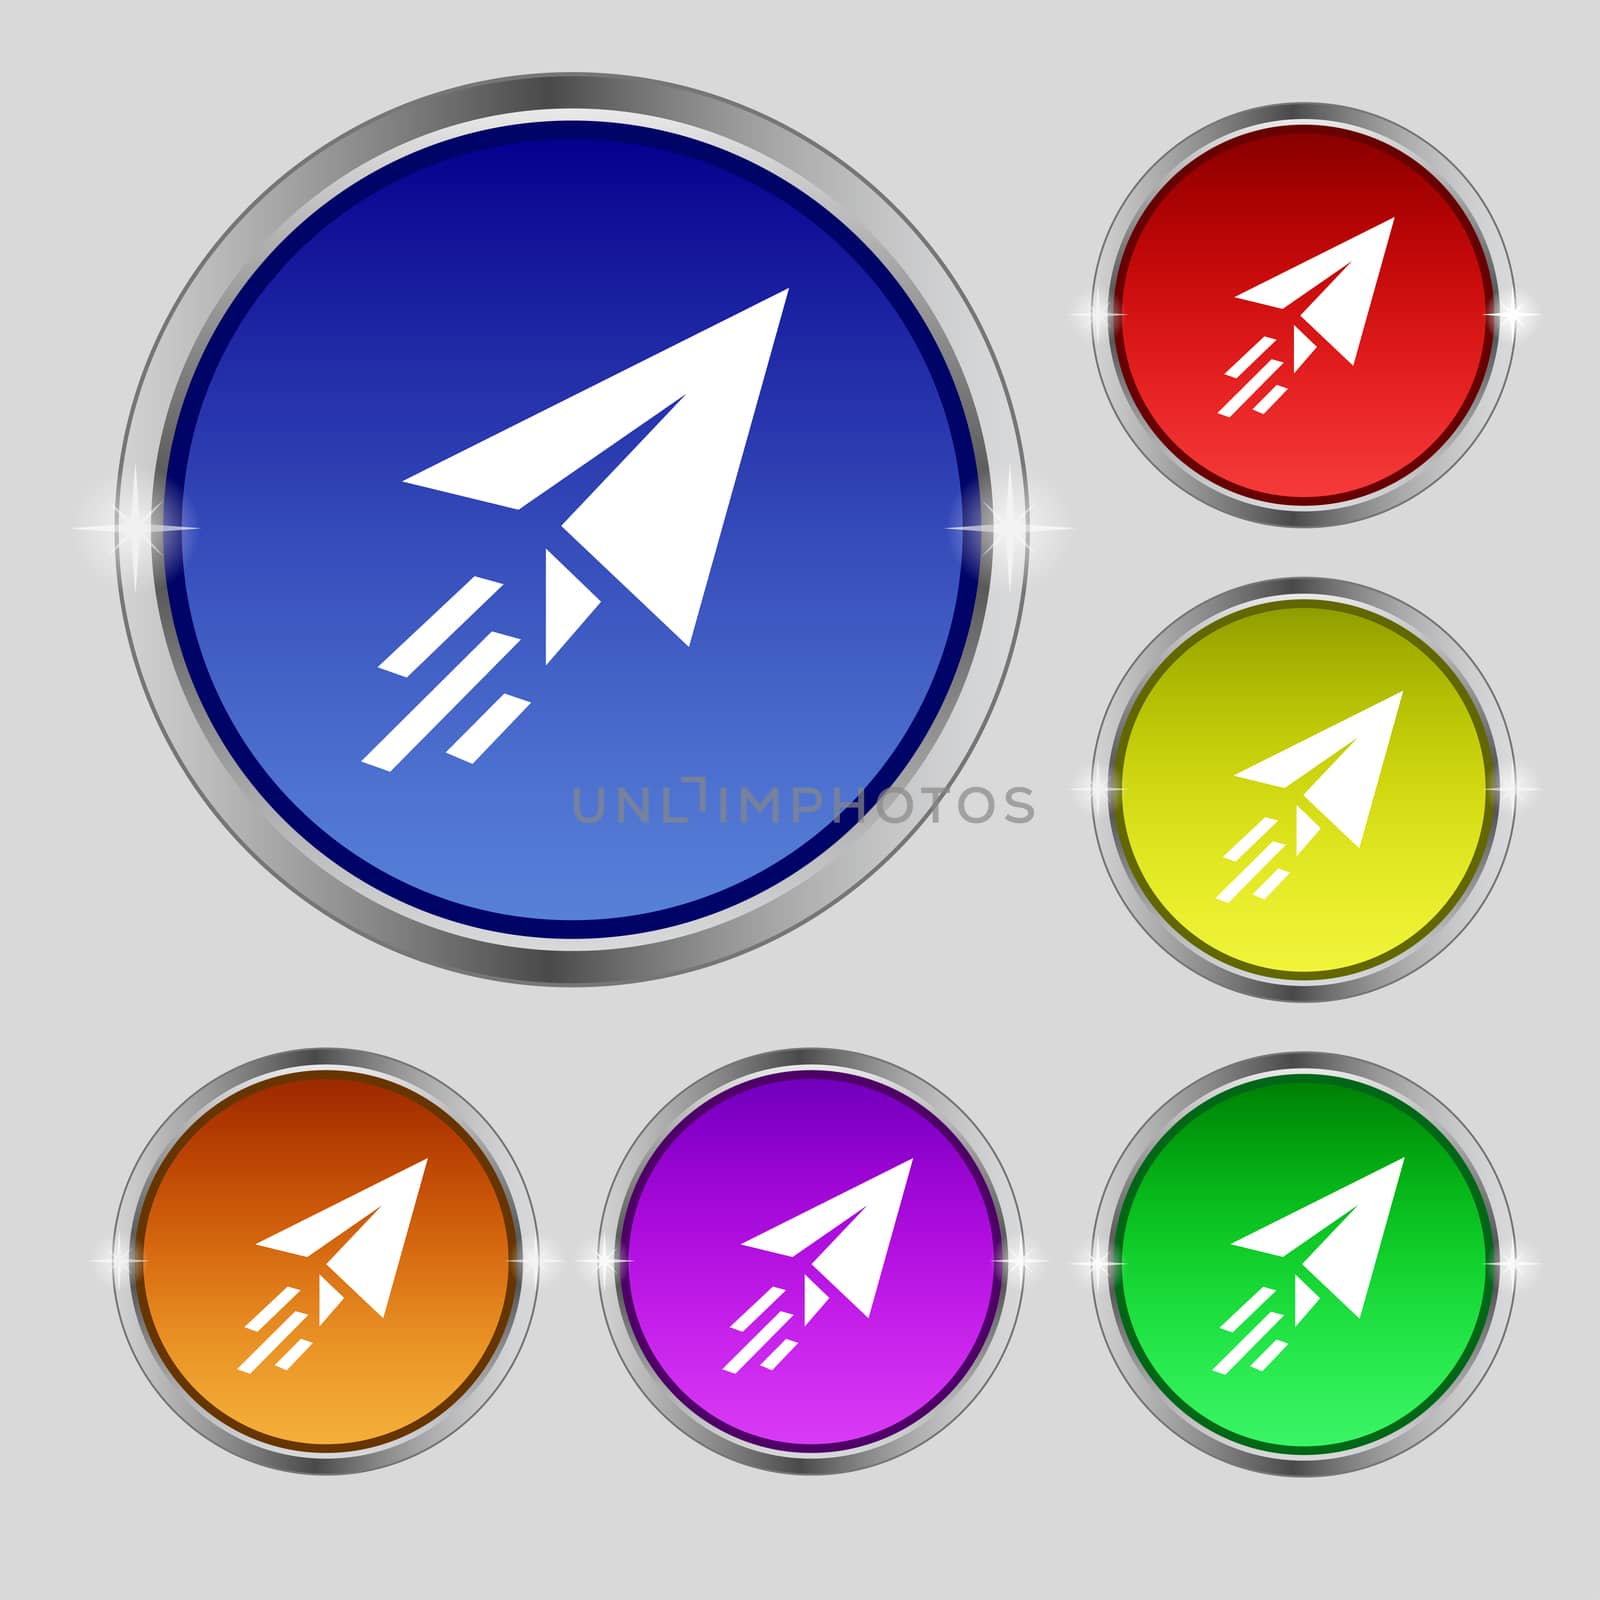 Paper airplane icon sign. Round symbol on bright colourful buttons. illustration